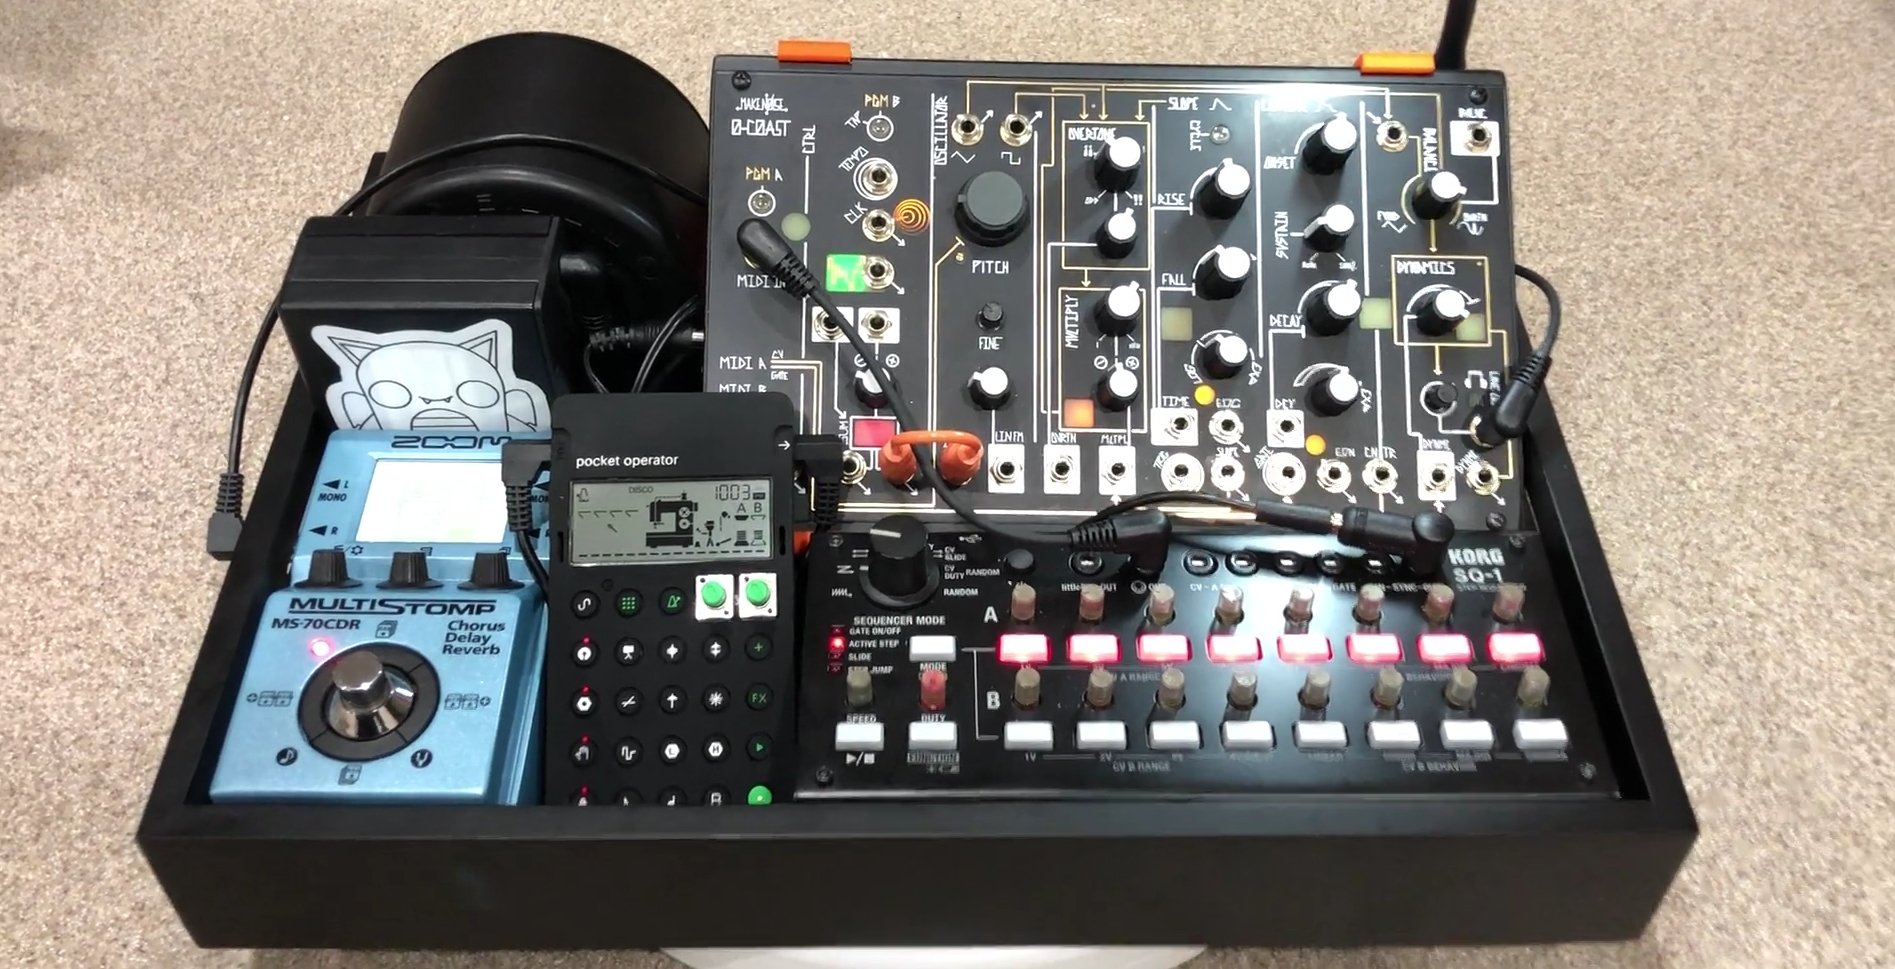 Caroline Swords Tea Tray Spin Battery Powered Minimalist Semi Modular From Catmandeux Feat Makenoise 0 Coast With Mendela 15v 10aa Battery Pack 3dwaves Stand Korg Sq1 Midi Cv To 0c Sync To Po12